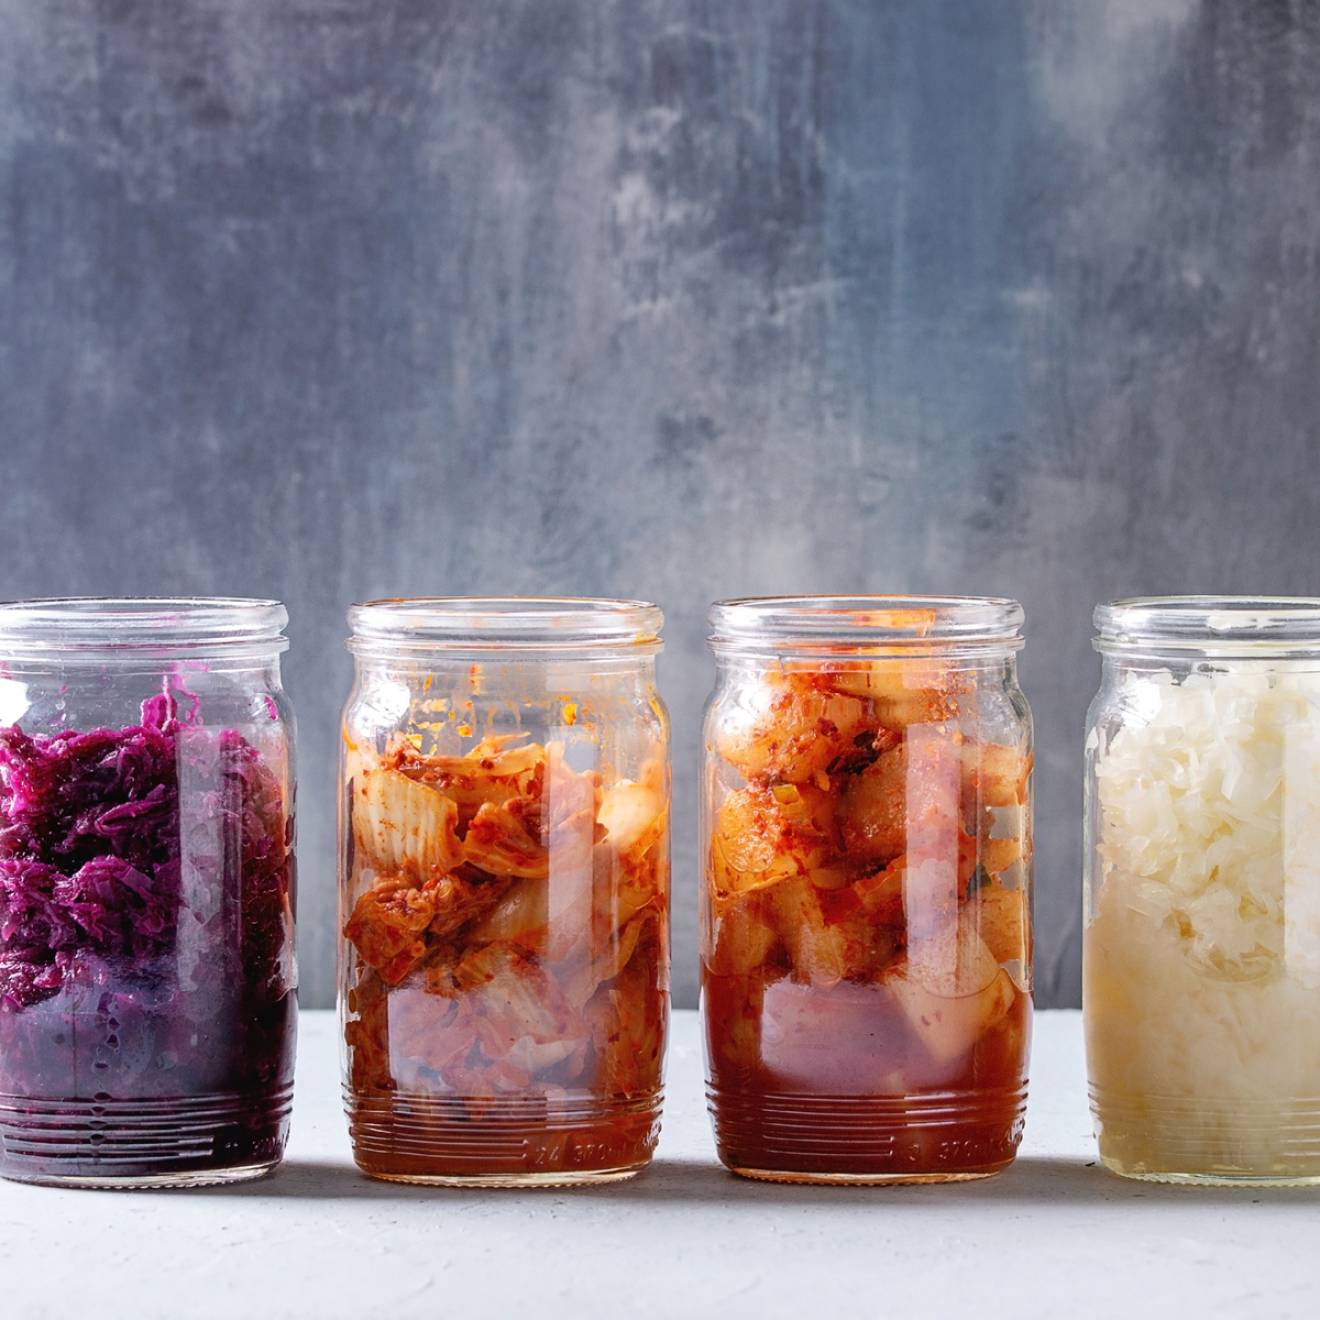 Variety of fermented food Korean traditional kimchi cabbage and radish salad, white and red sauerkraut in glass jars in row over grey blue table